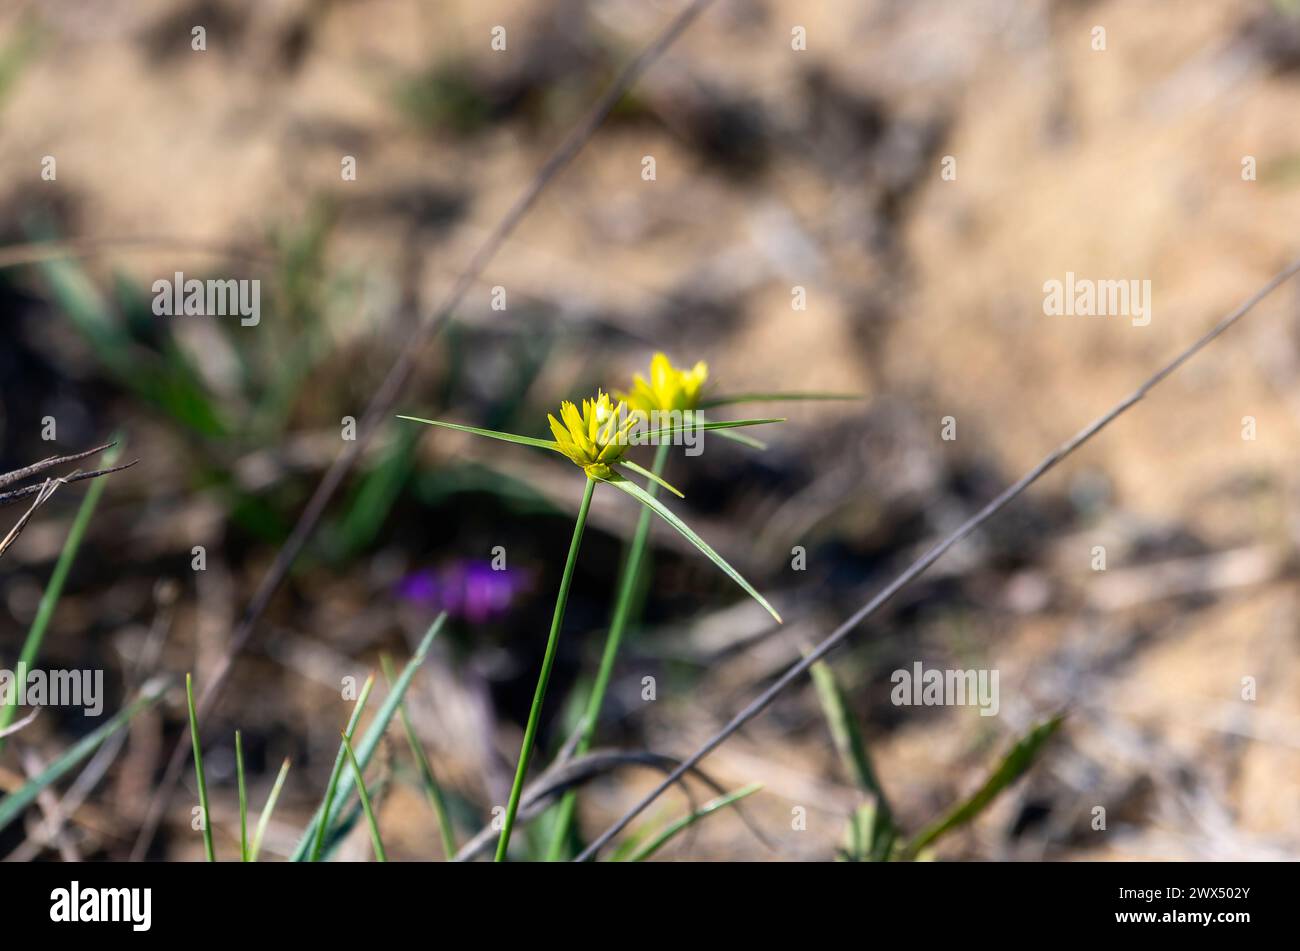 A tiny yellow Golden Sedge Cyperus sphaerocephalus flower stands alone in a vast field, surrounded by grass and under the open sky. Stock Photo